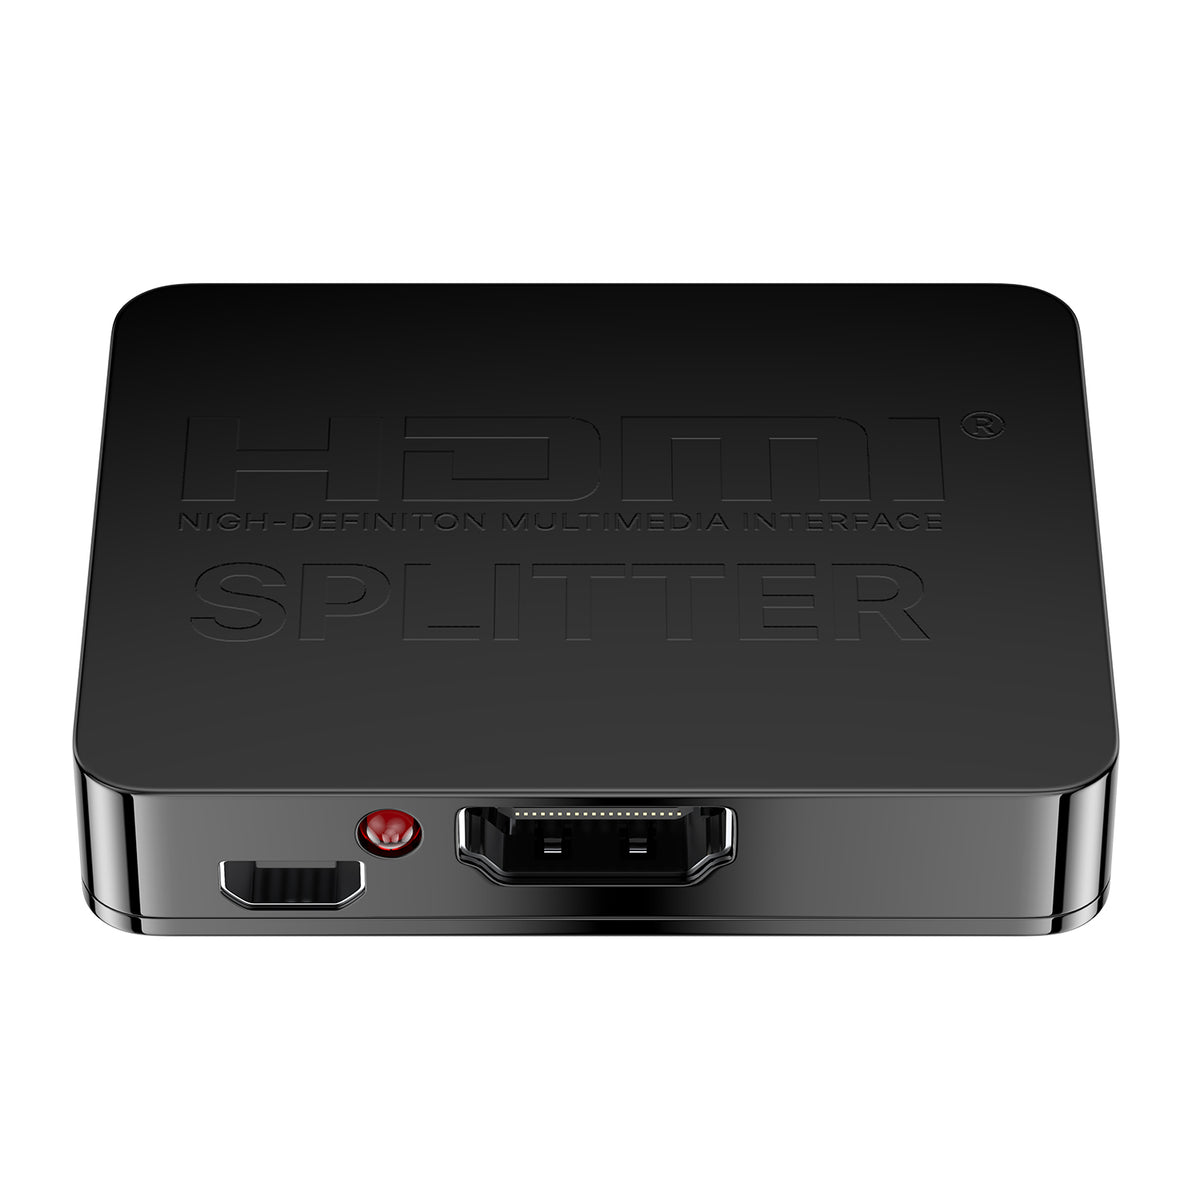 HDMI Splitter Dual Monitors 1 in 2 out Extended 4K Display